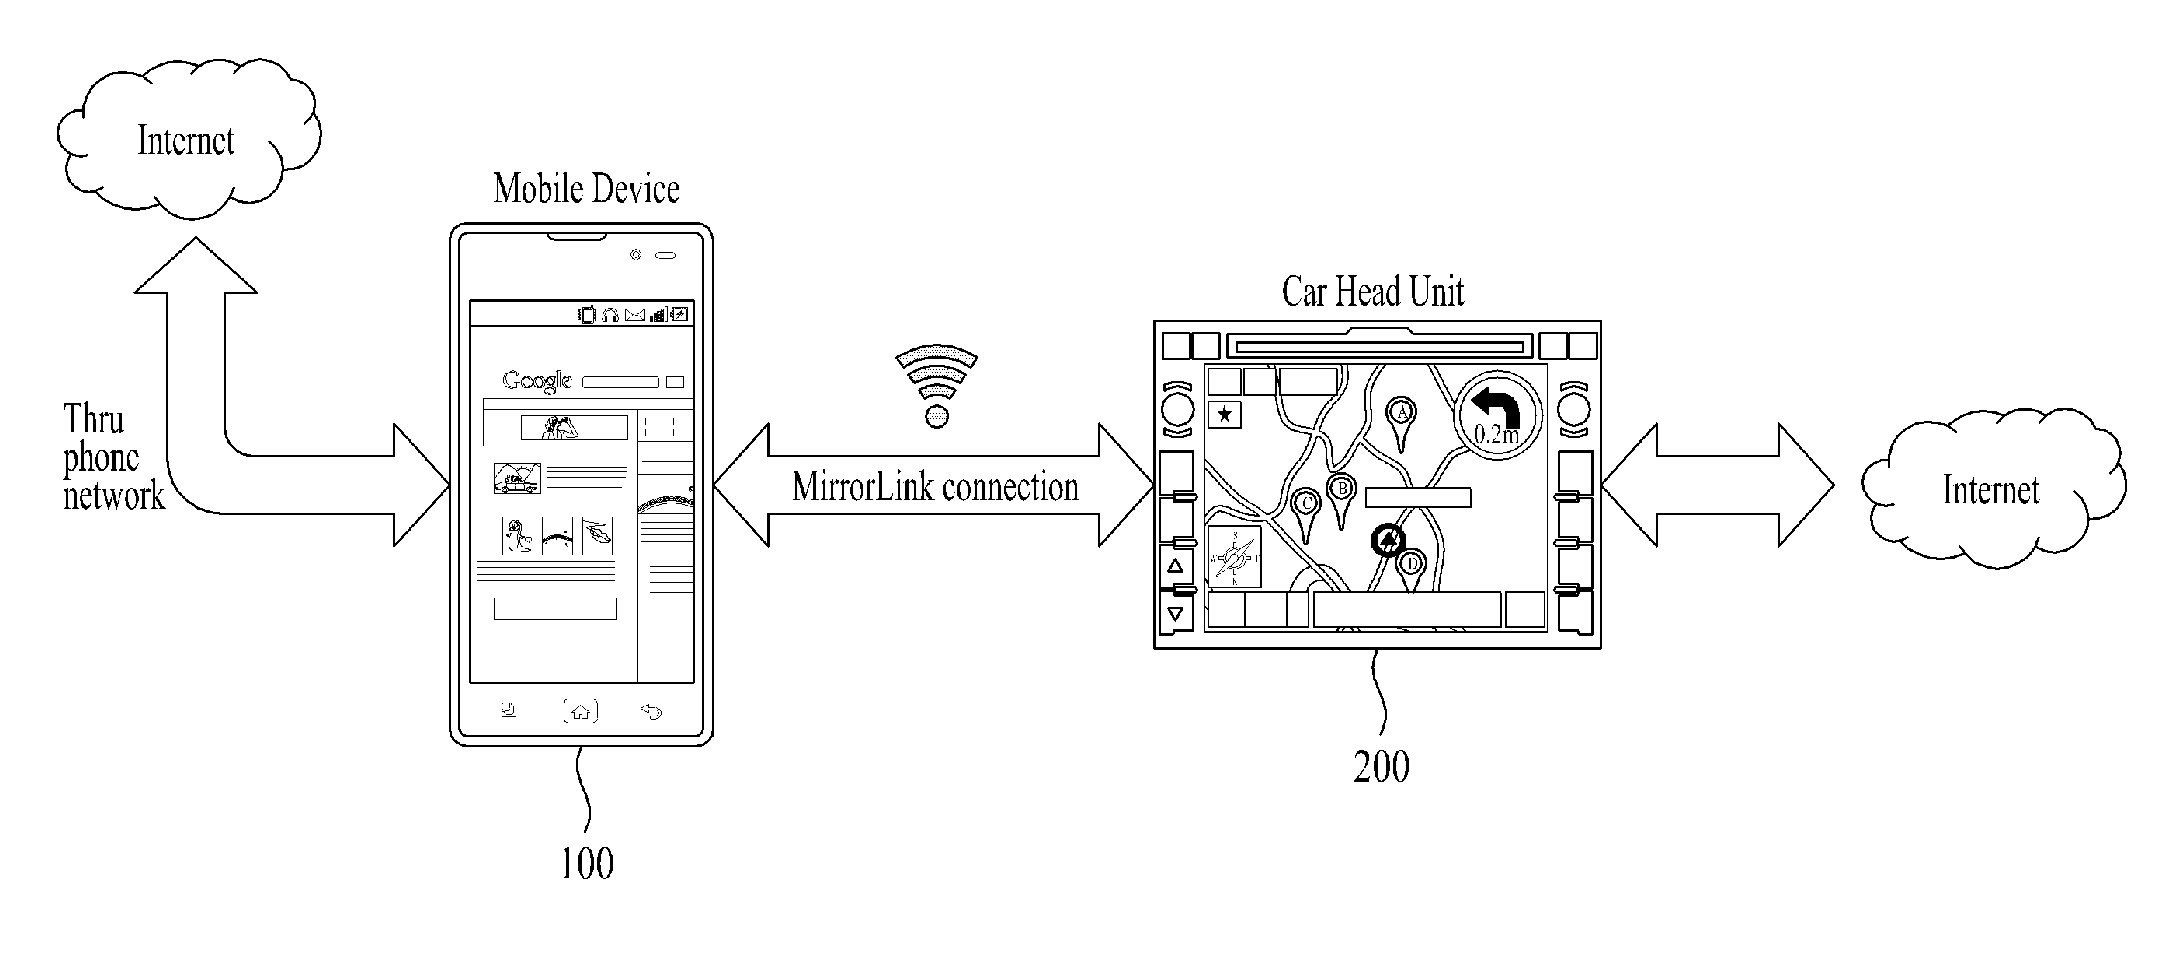 Mobile terminal, image display apparatus mounted in vehicle and data processing method using the same